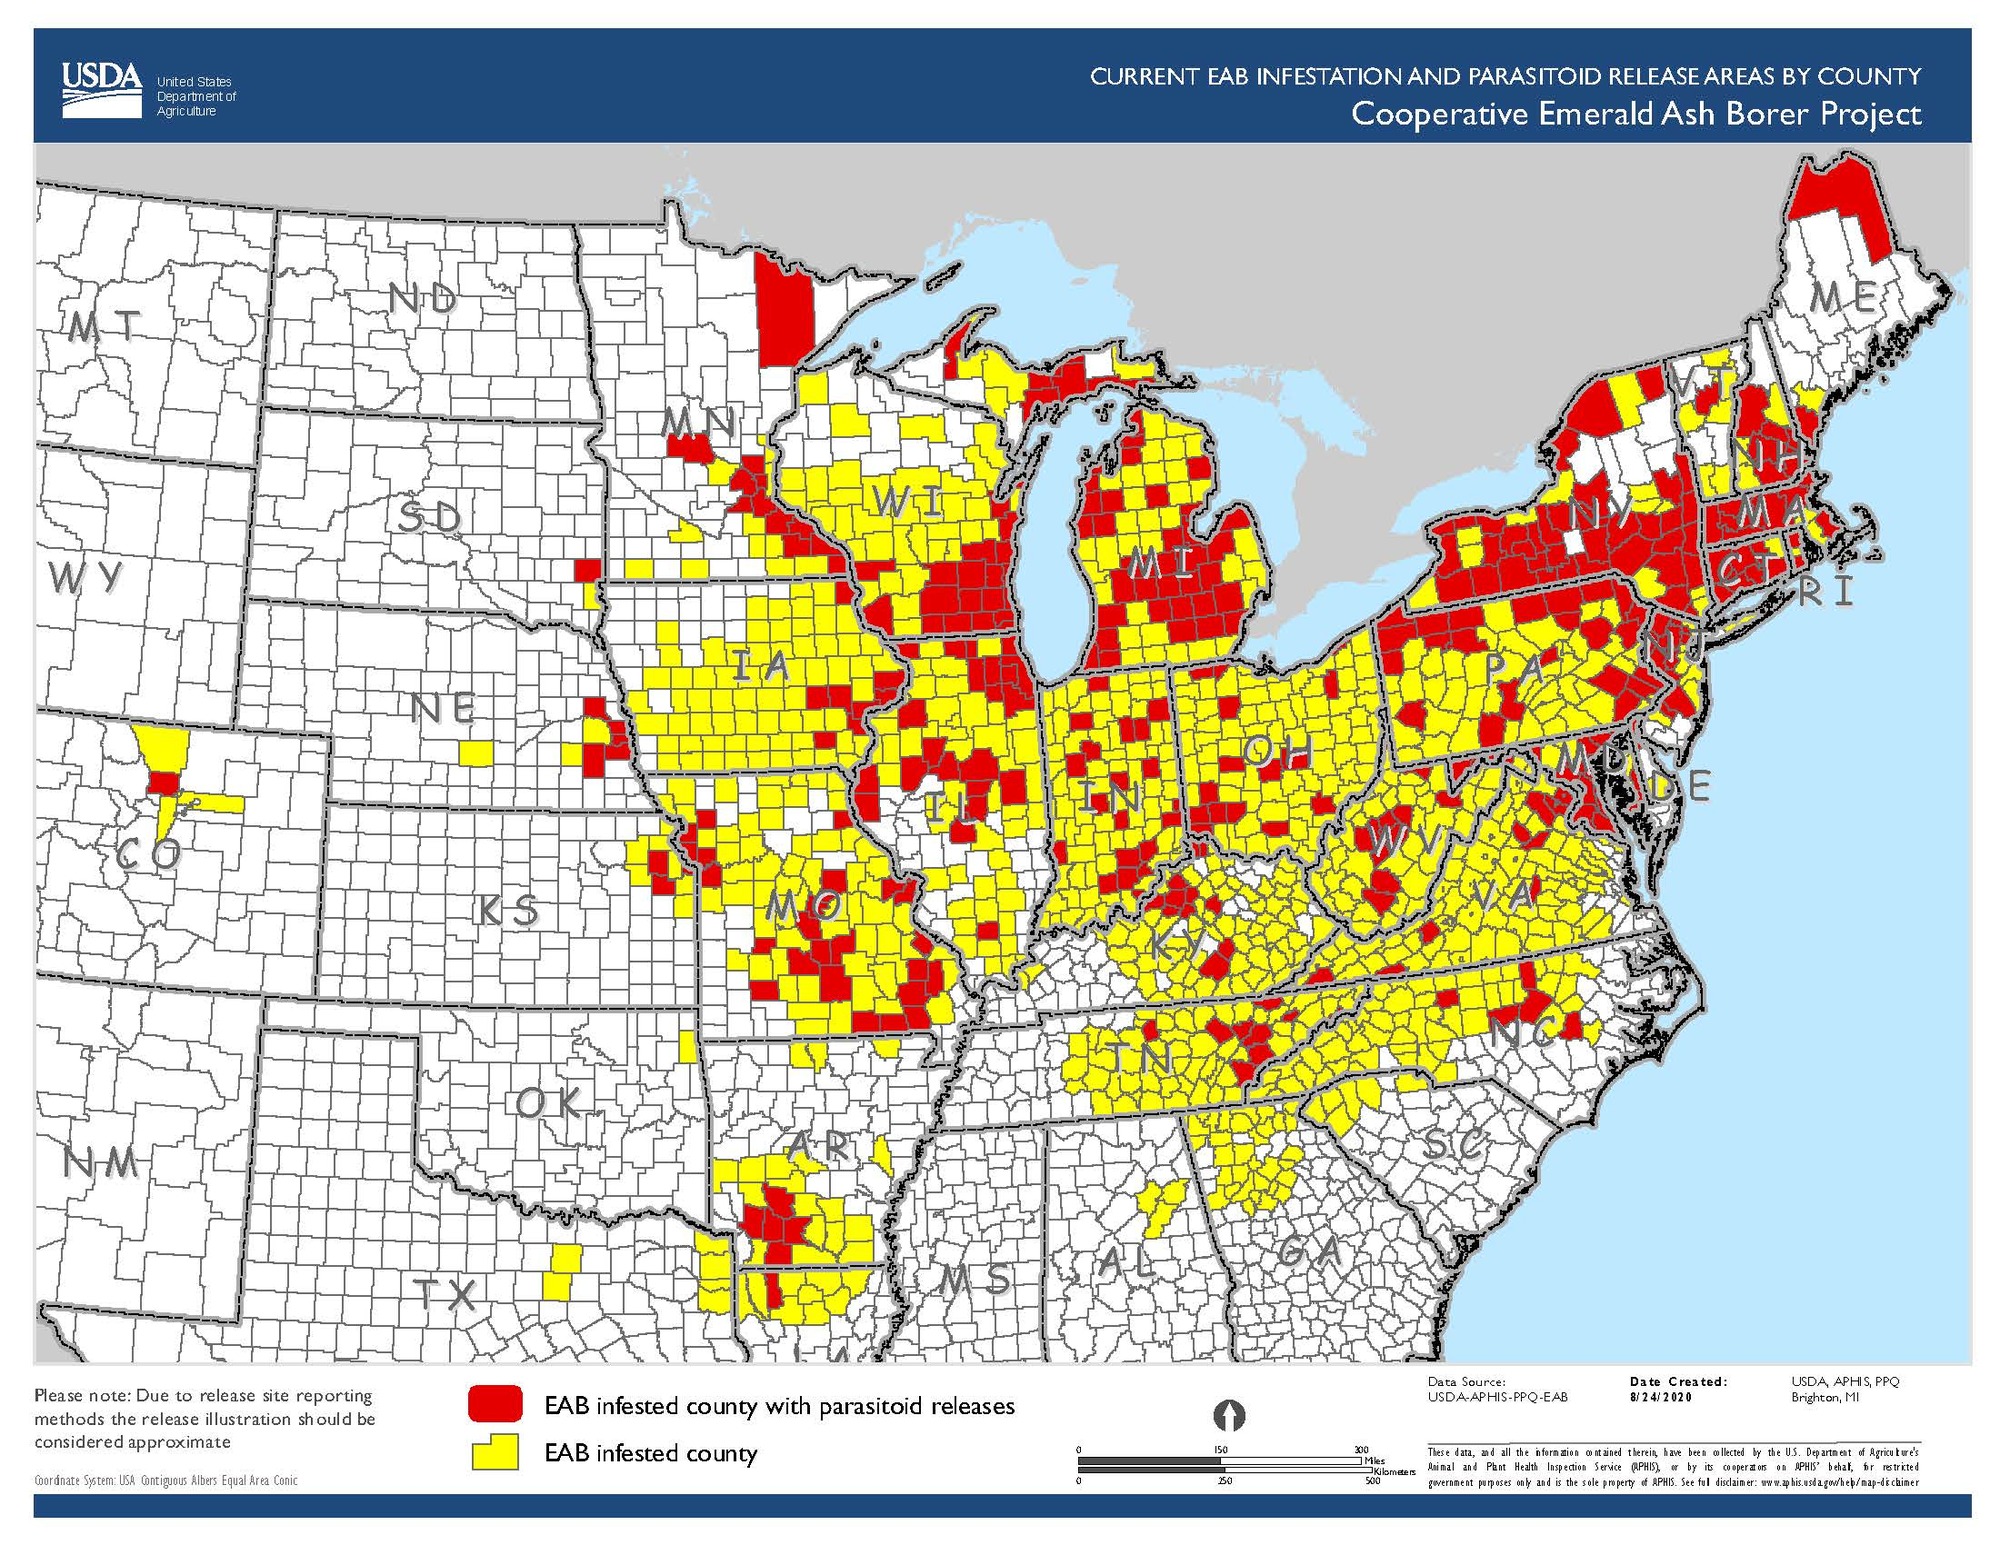 Color map showing counties infested with emerald ash borer and counties where parasitoids were released